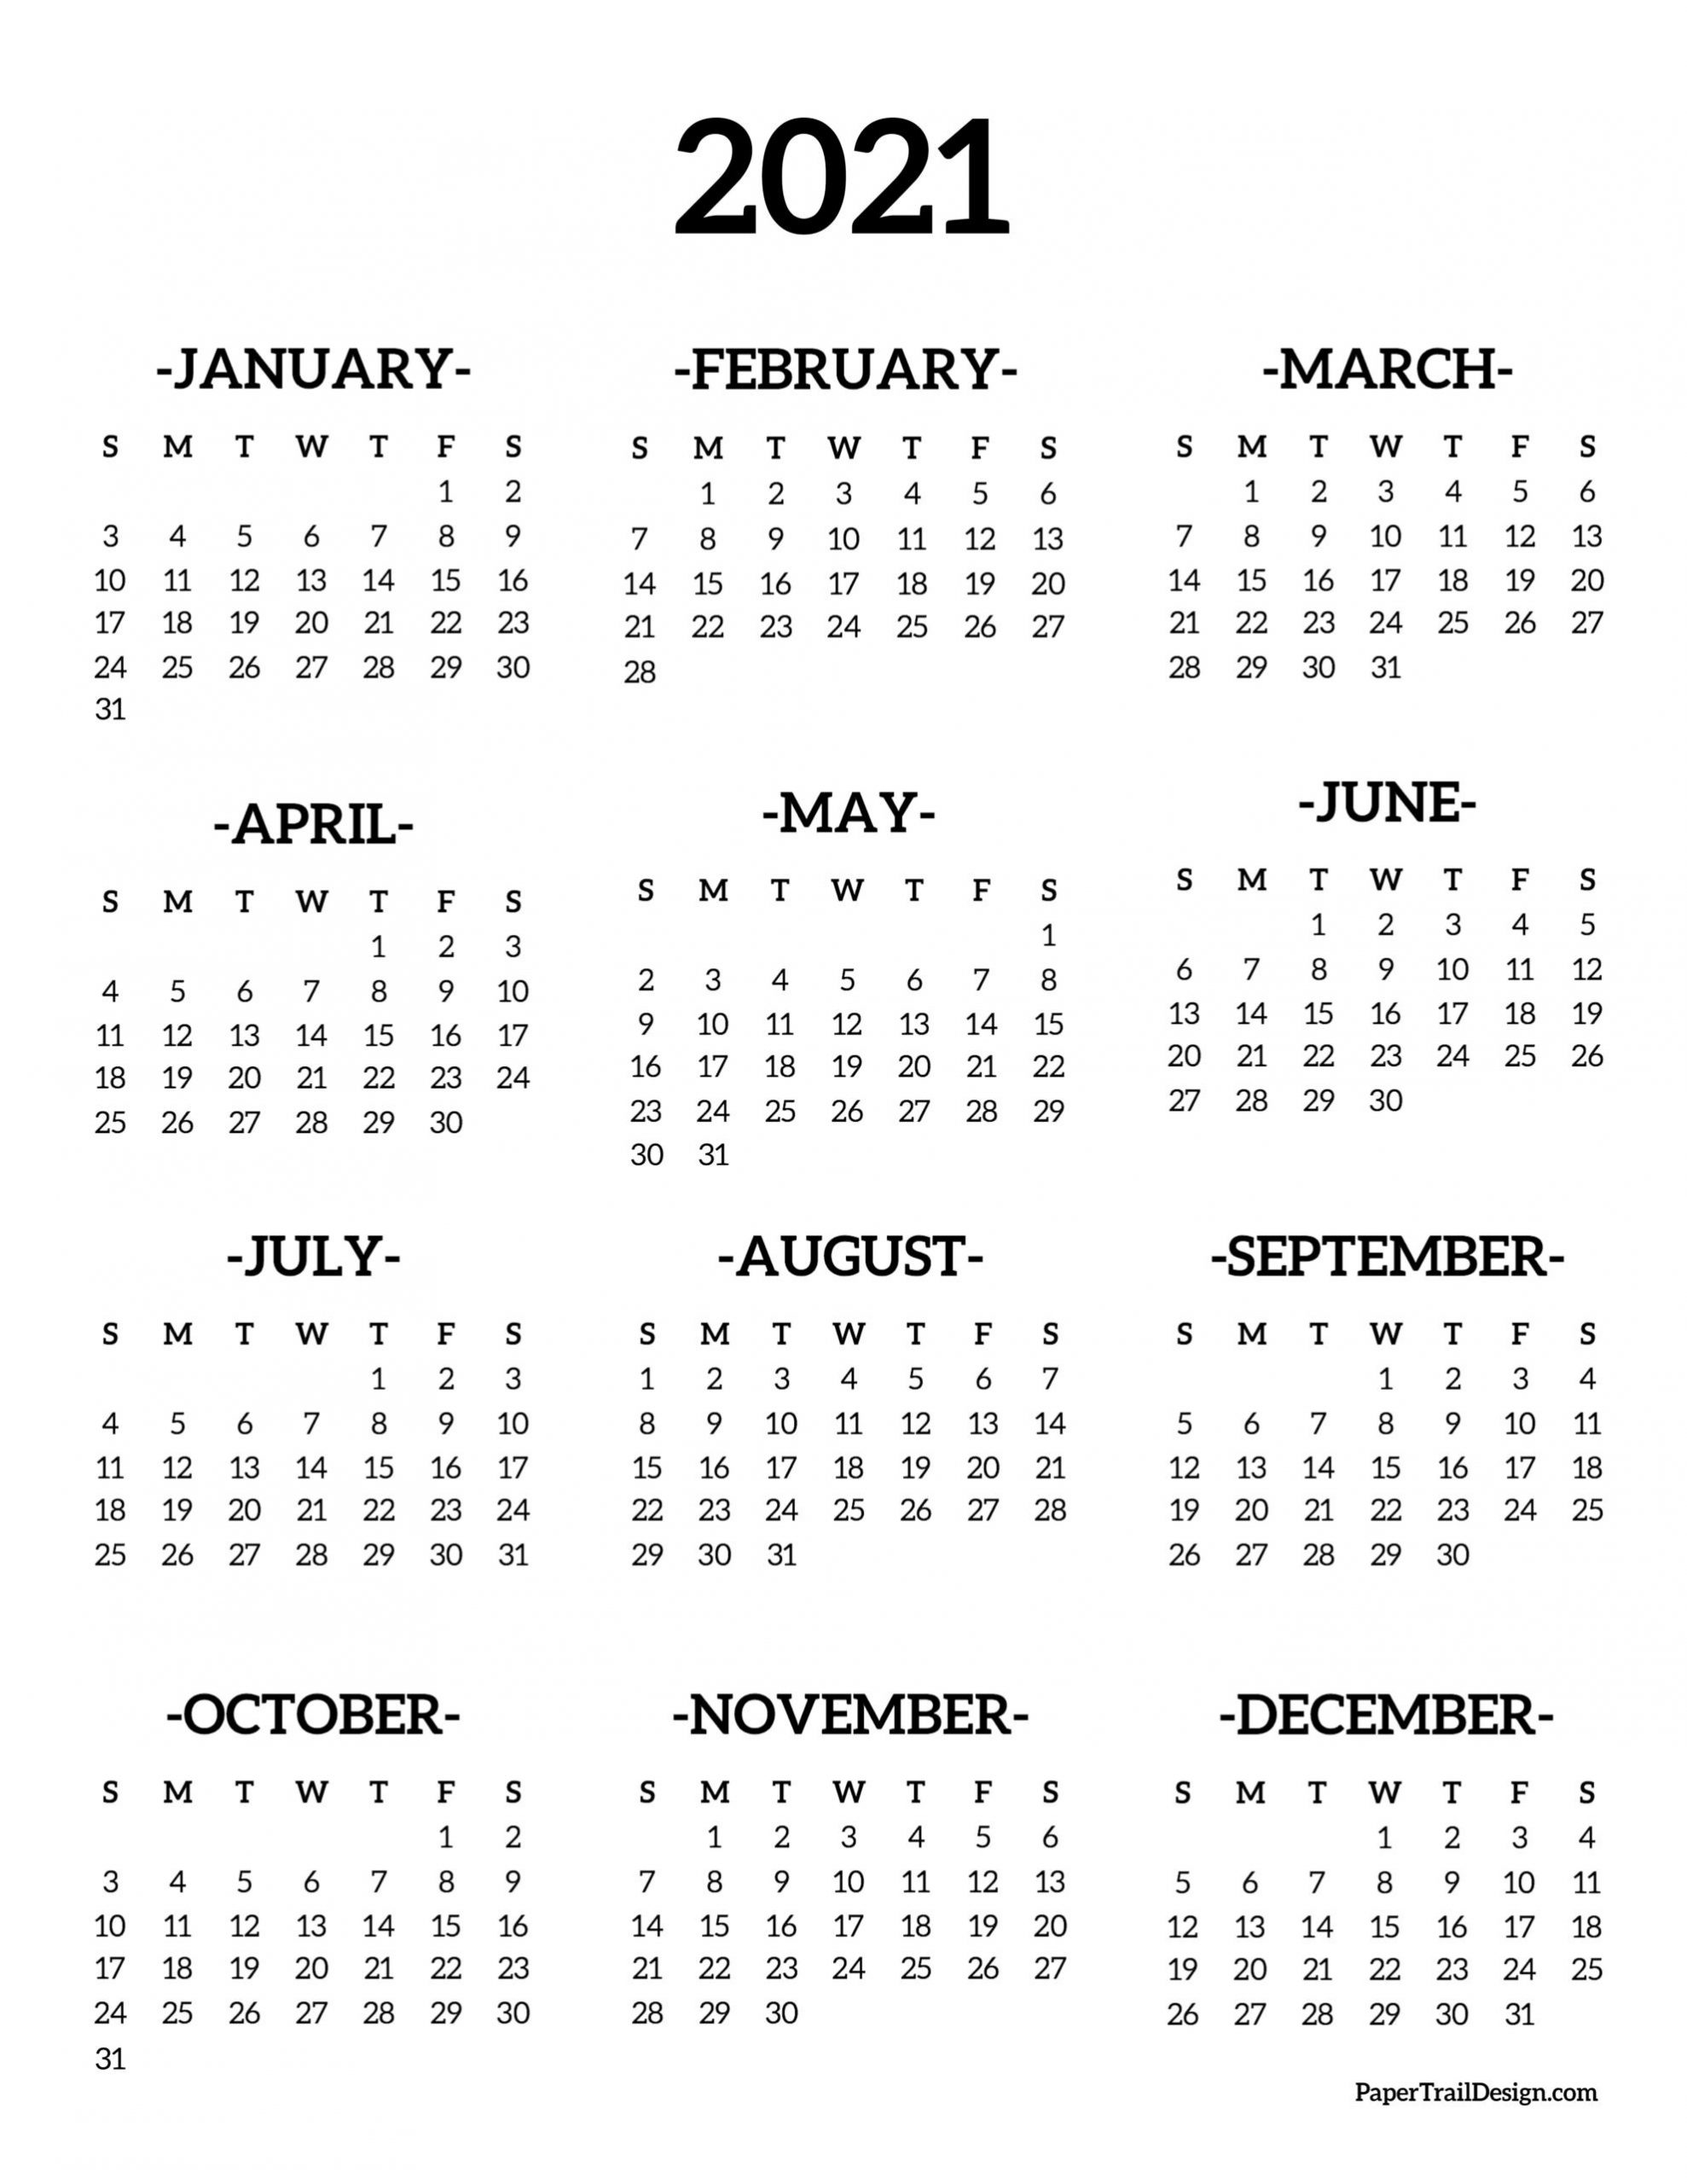 Calendar 2021 Printable One Page | Paper Trail Design-2021 Year At A Glance Free Calendar